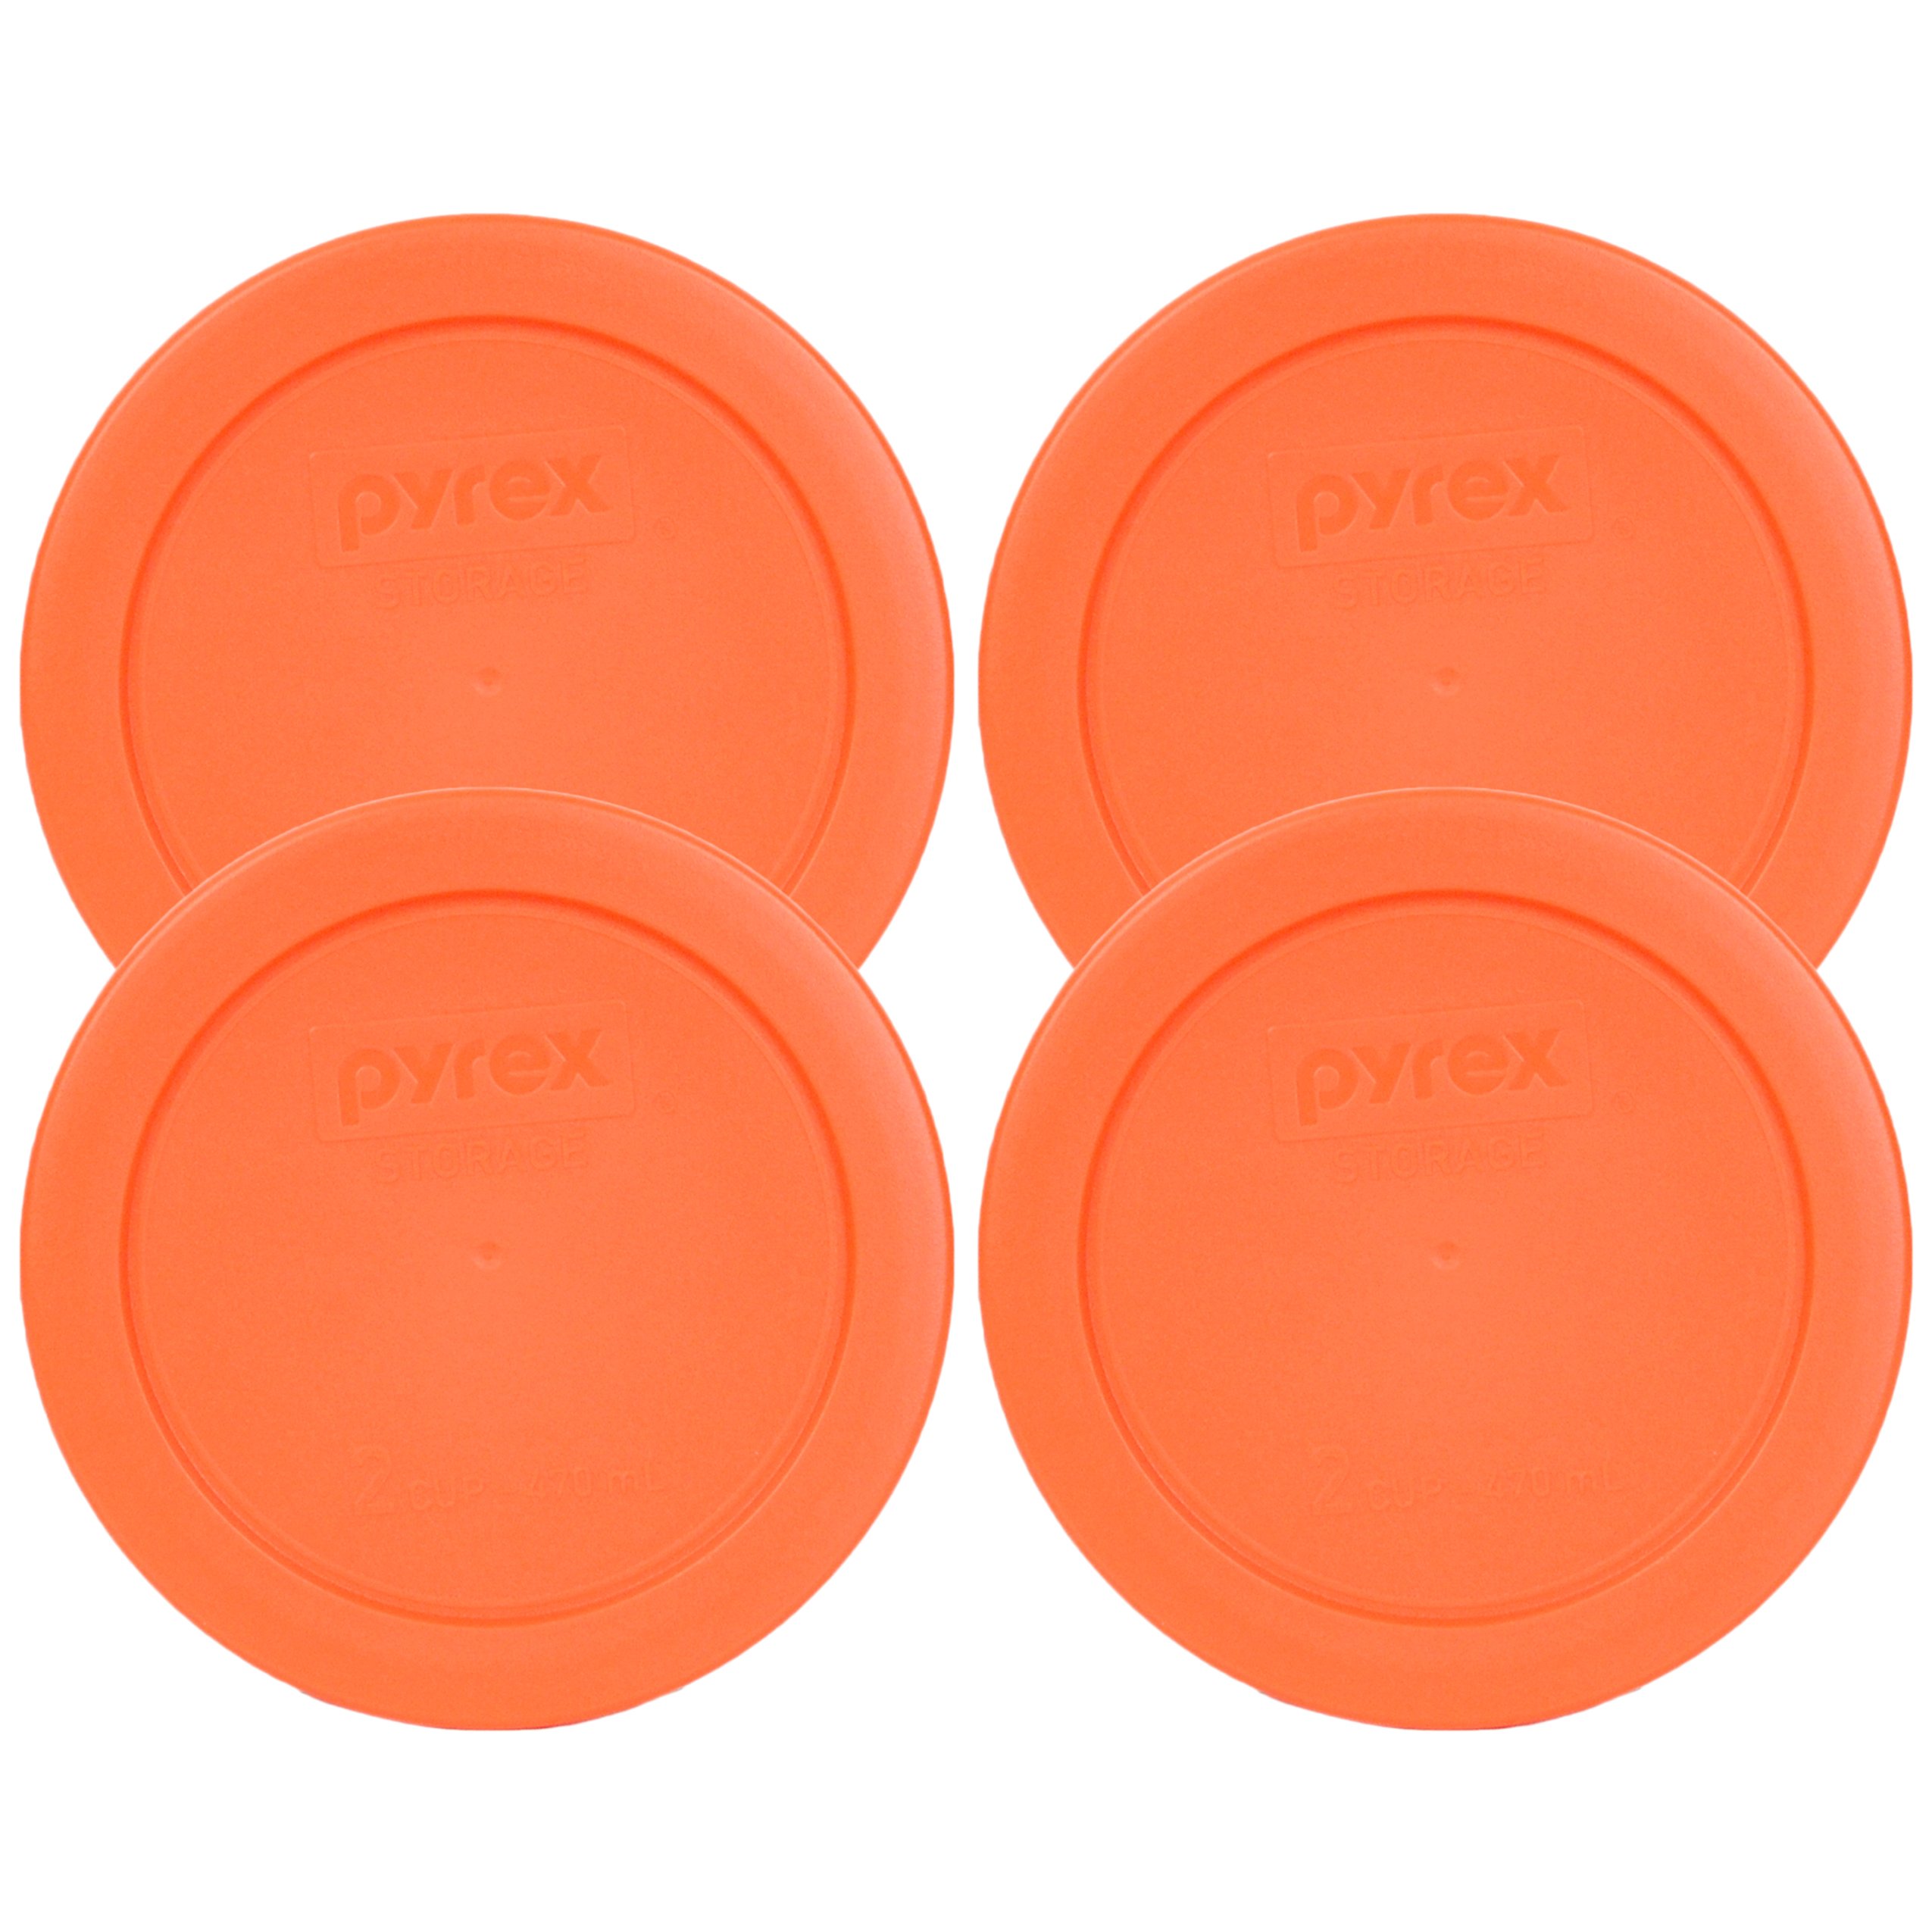 Pyrex 2 Cup Round Storage Cover #7200-PC for Glass Bowls (4, Orange)